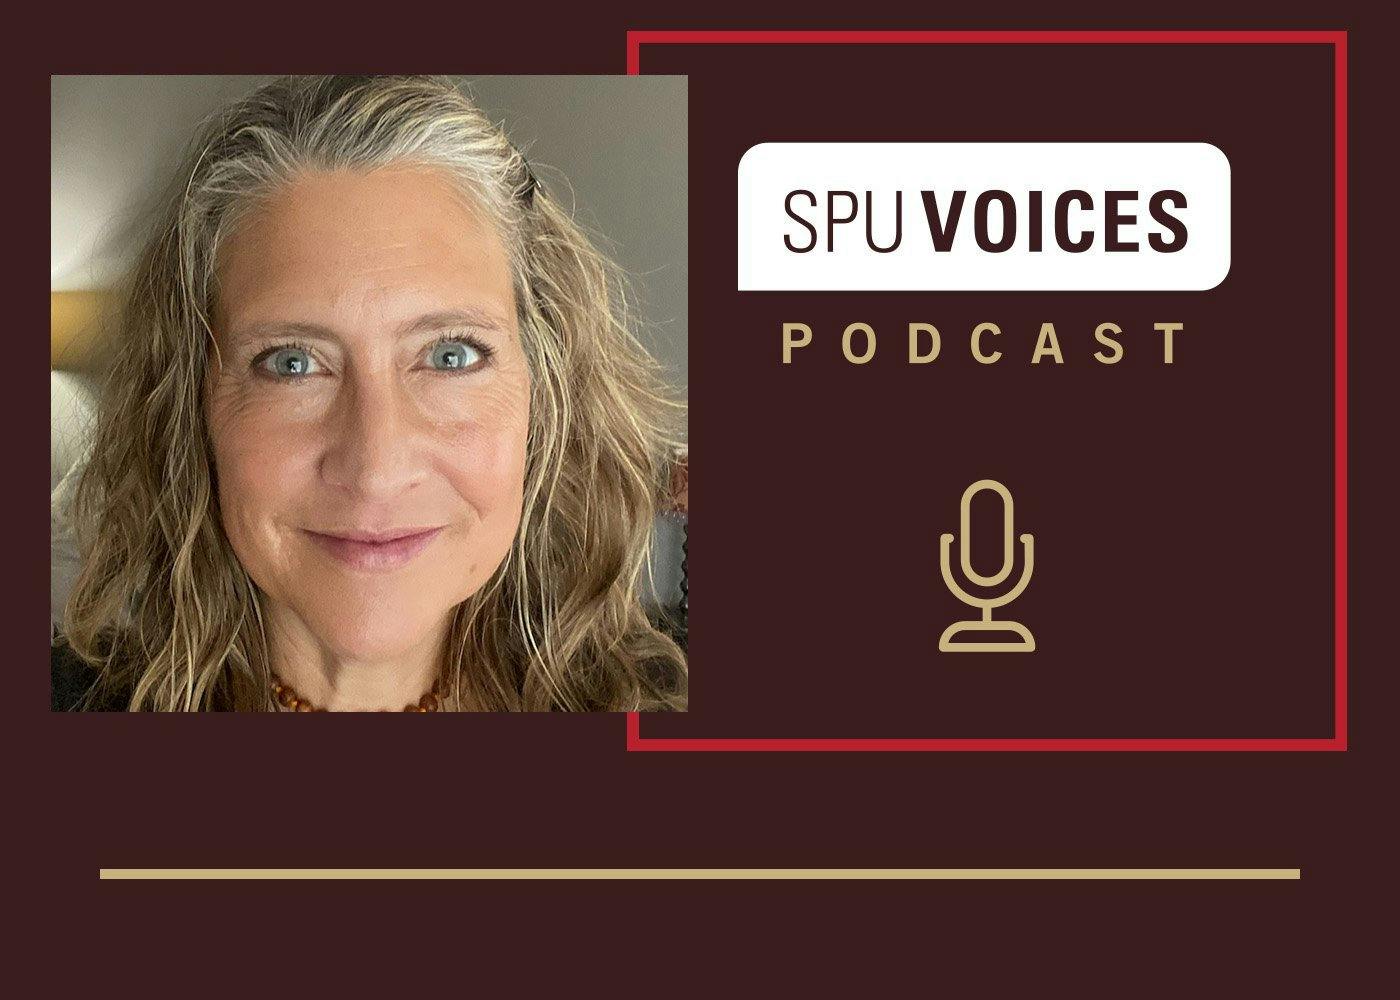 Cami Ostman on the SPU Voices Podcast